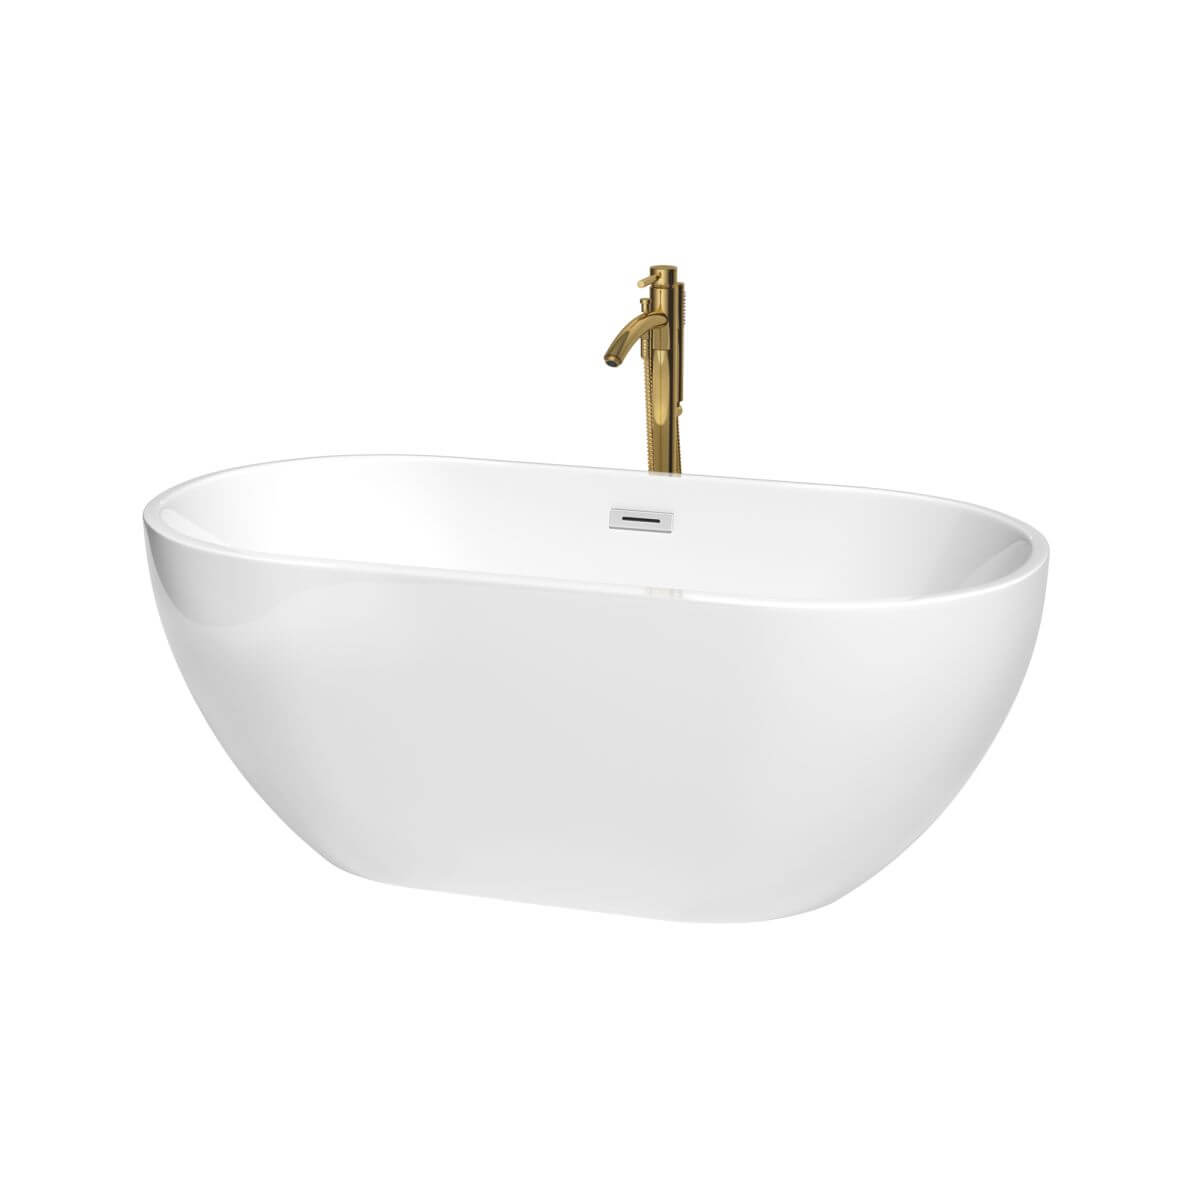 Wyndham Collection Brooklyn 60 inch Freestanding Bathtub in White with Polished Chrome Trim and Floor Mounted Faucet in Brushed Gold - WCOBT200060PCATPGD